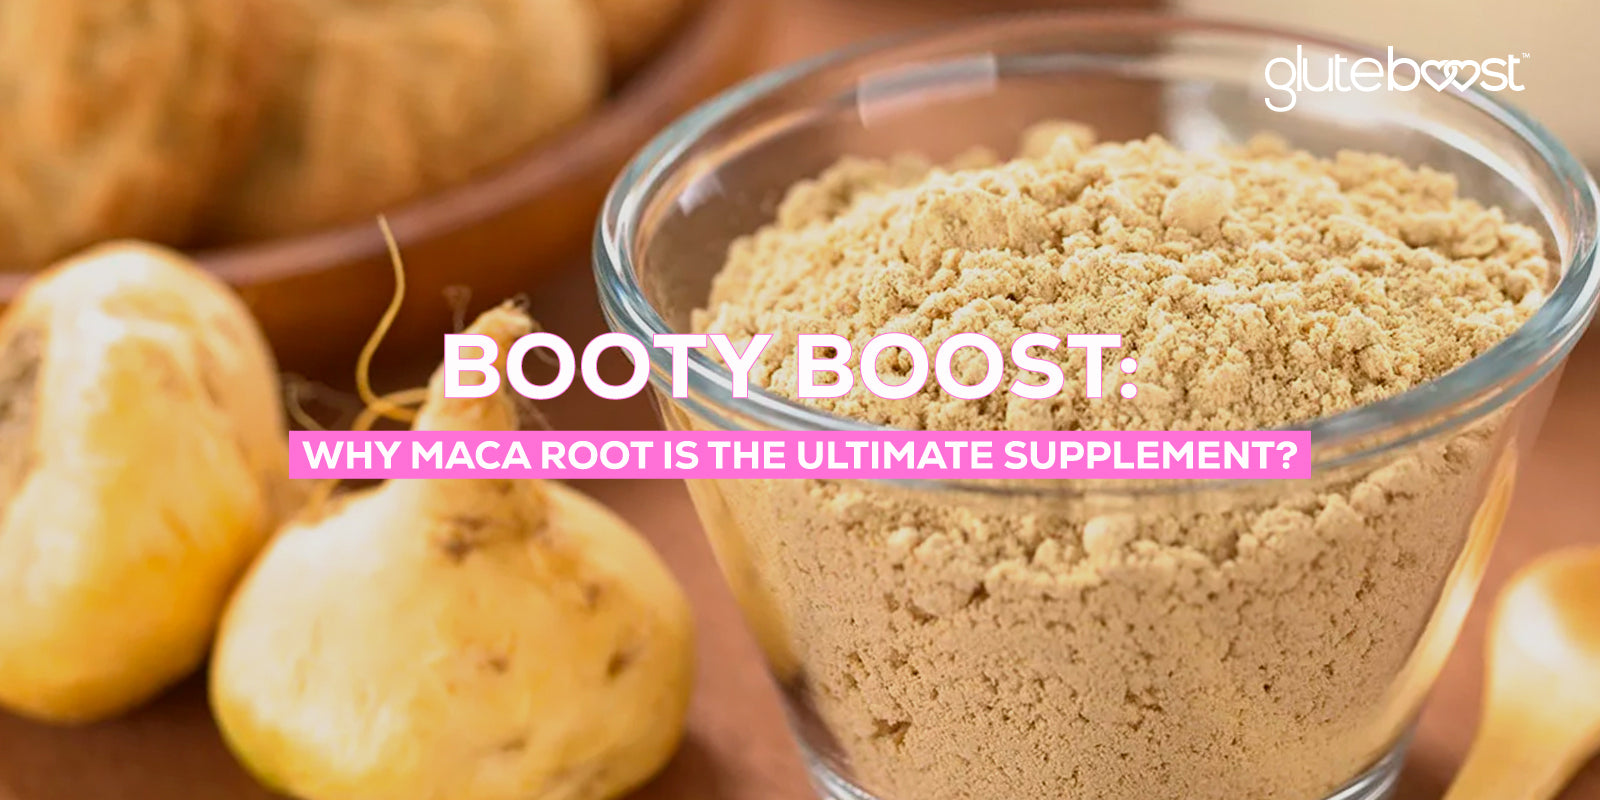 Booty Boost: Why Maca Root is the Ultimate Supplement for Getting a Bigger Butt